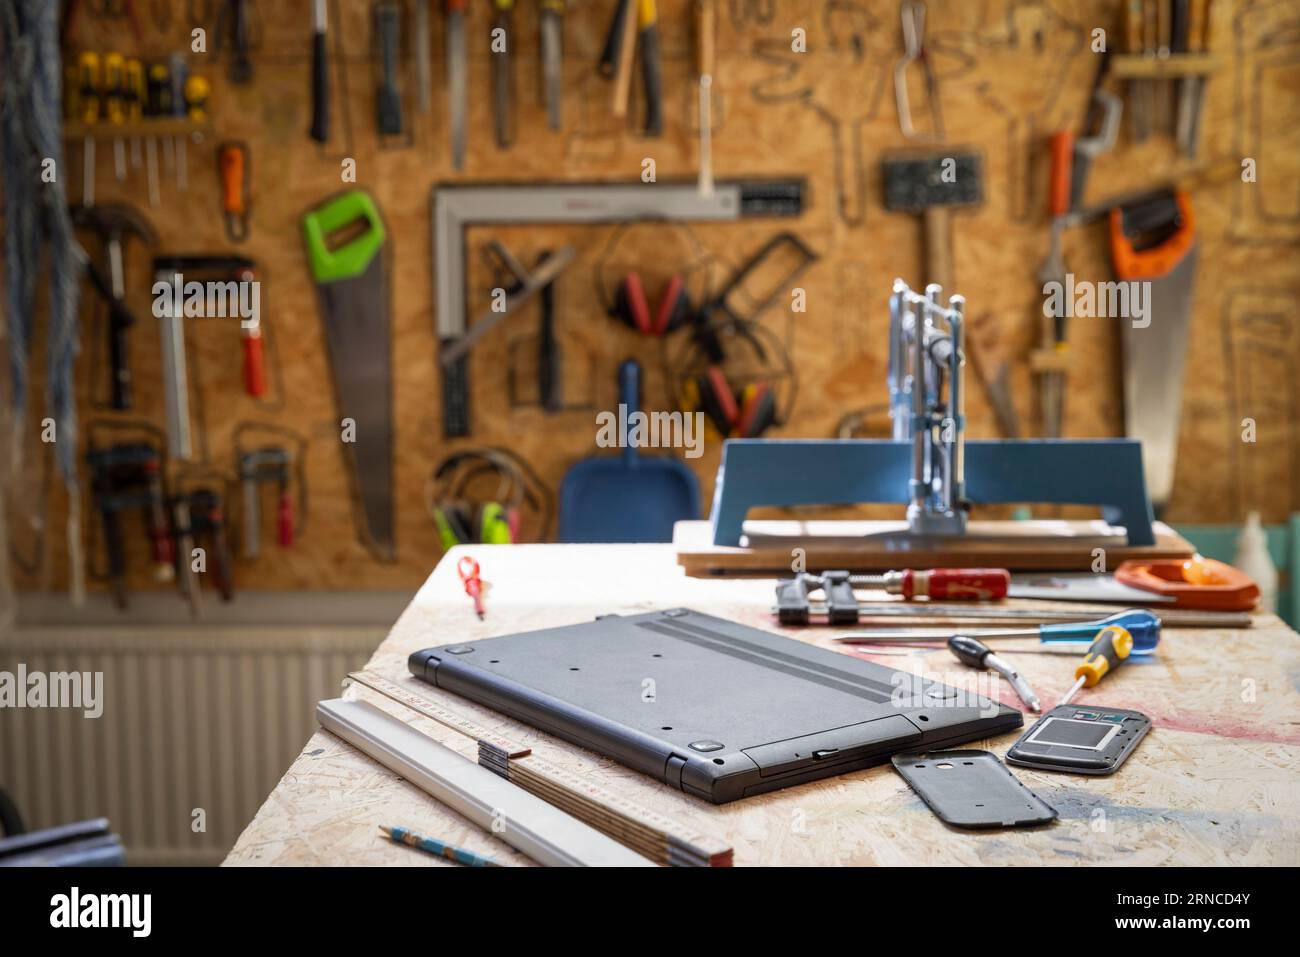 Laptop kept on table with tools at electronic recycling center Stock Photo